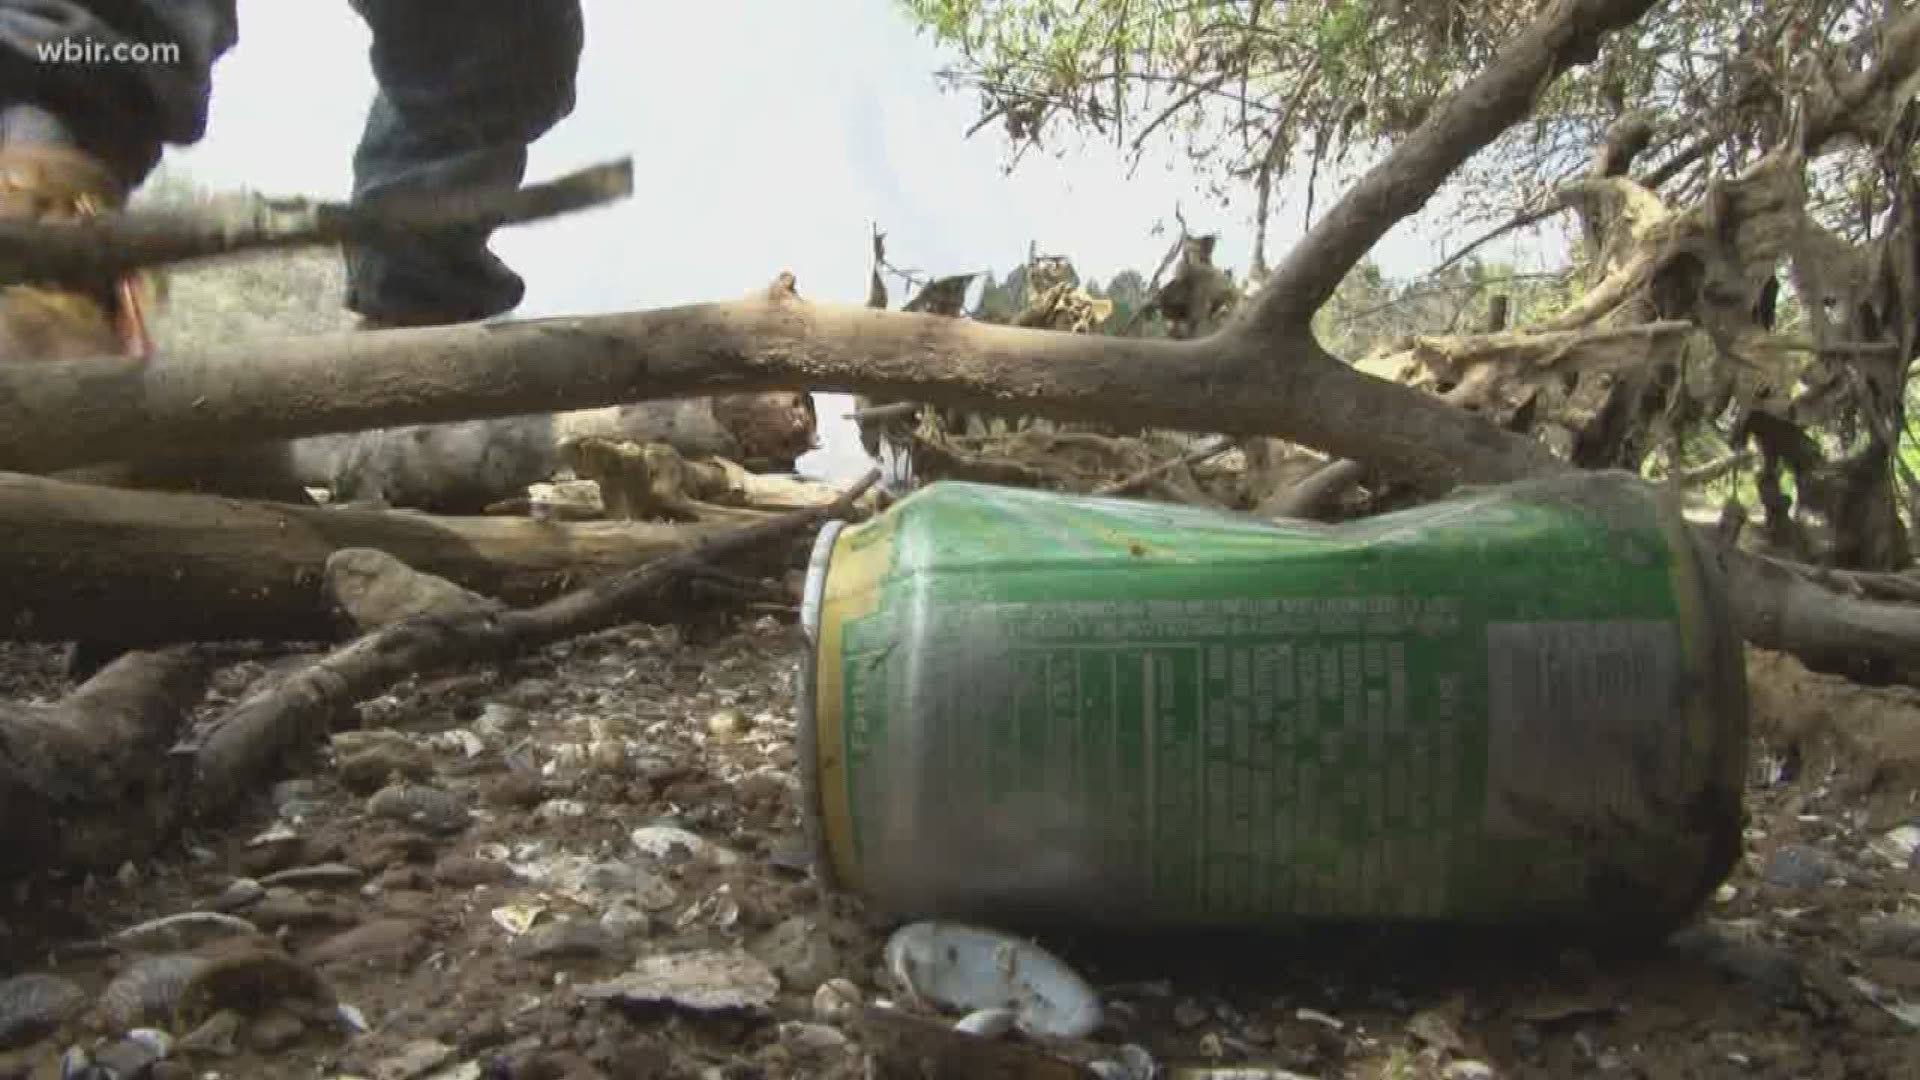 A special $10,000 grant helped crews clean up the water.